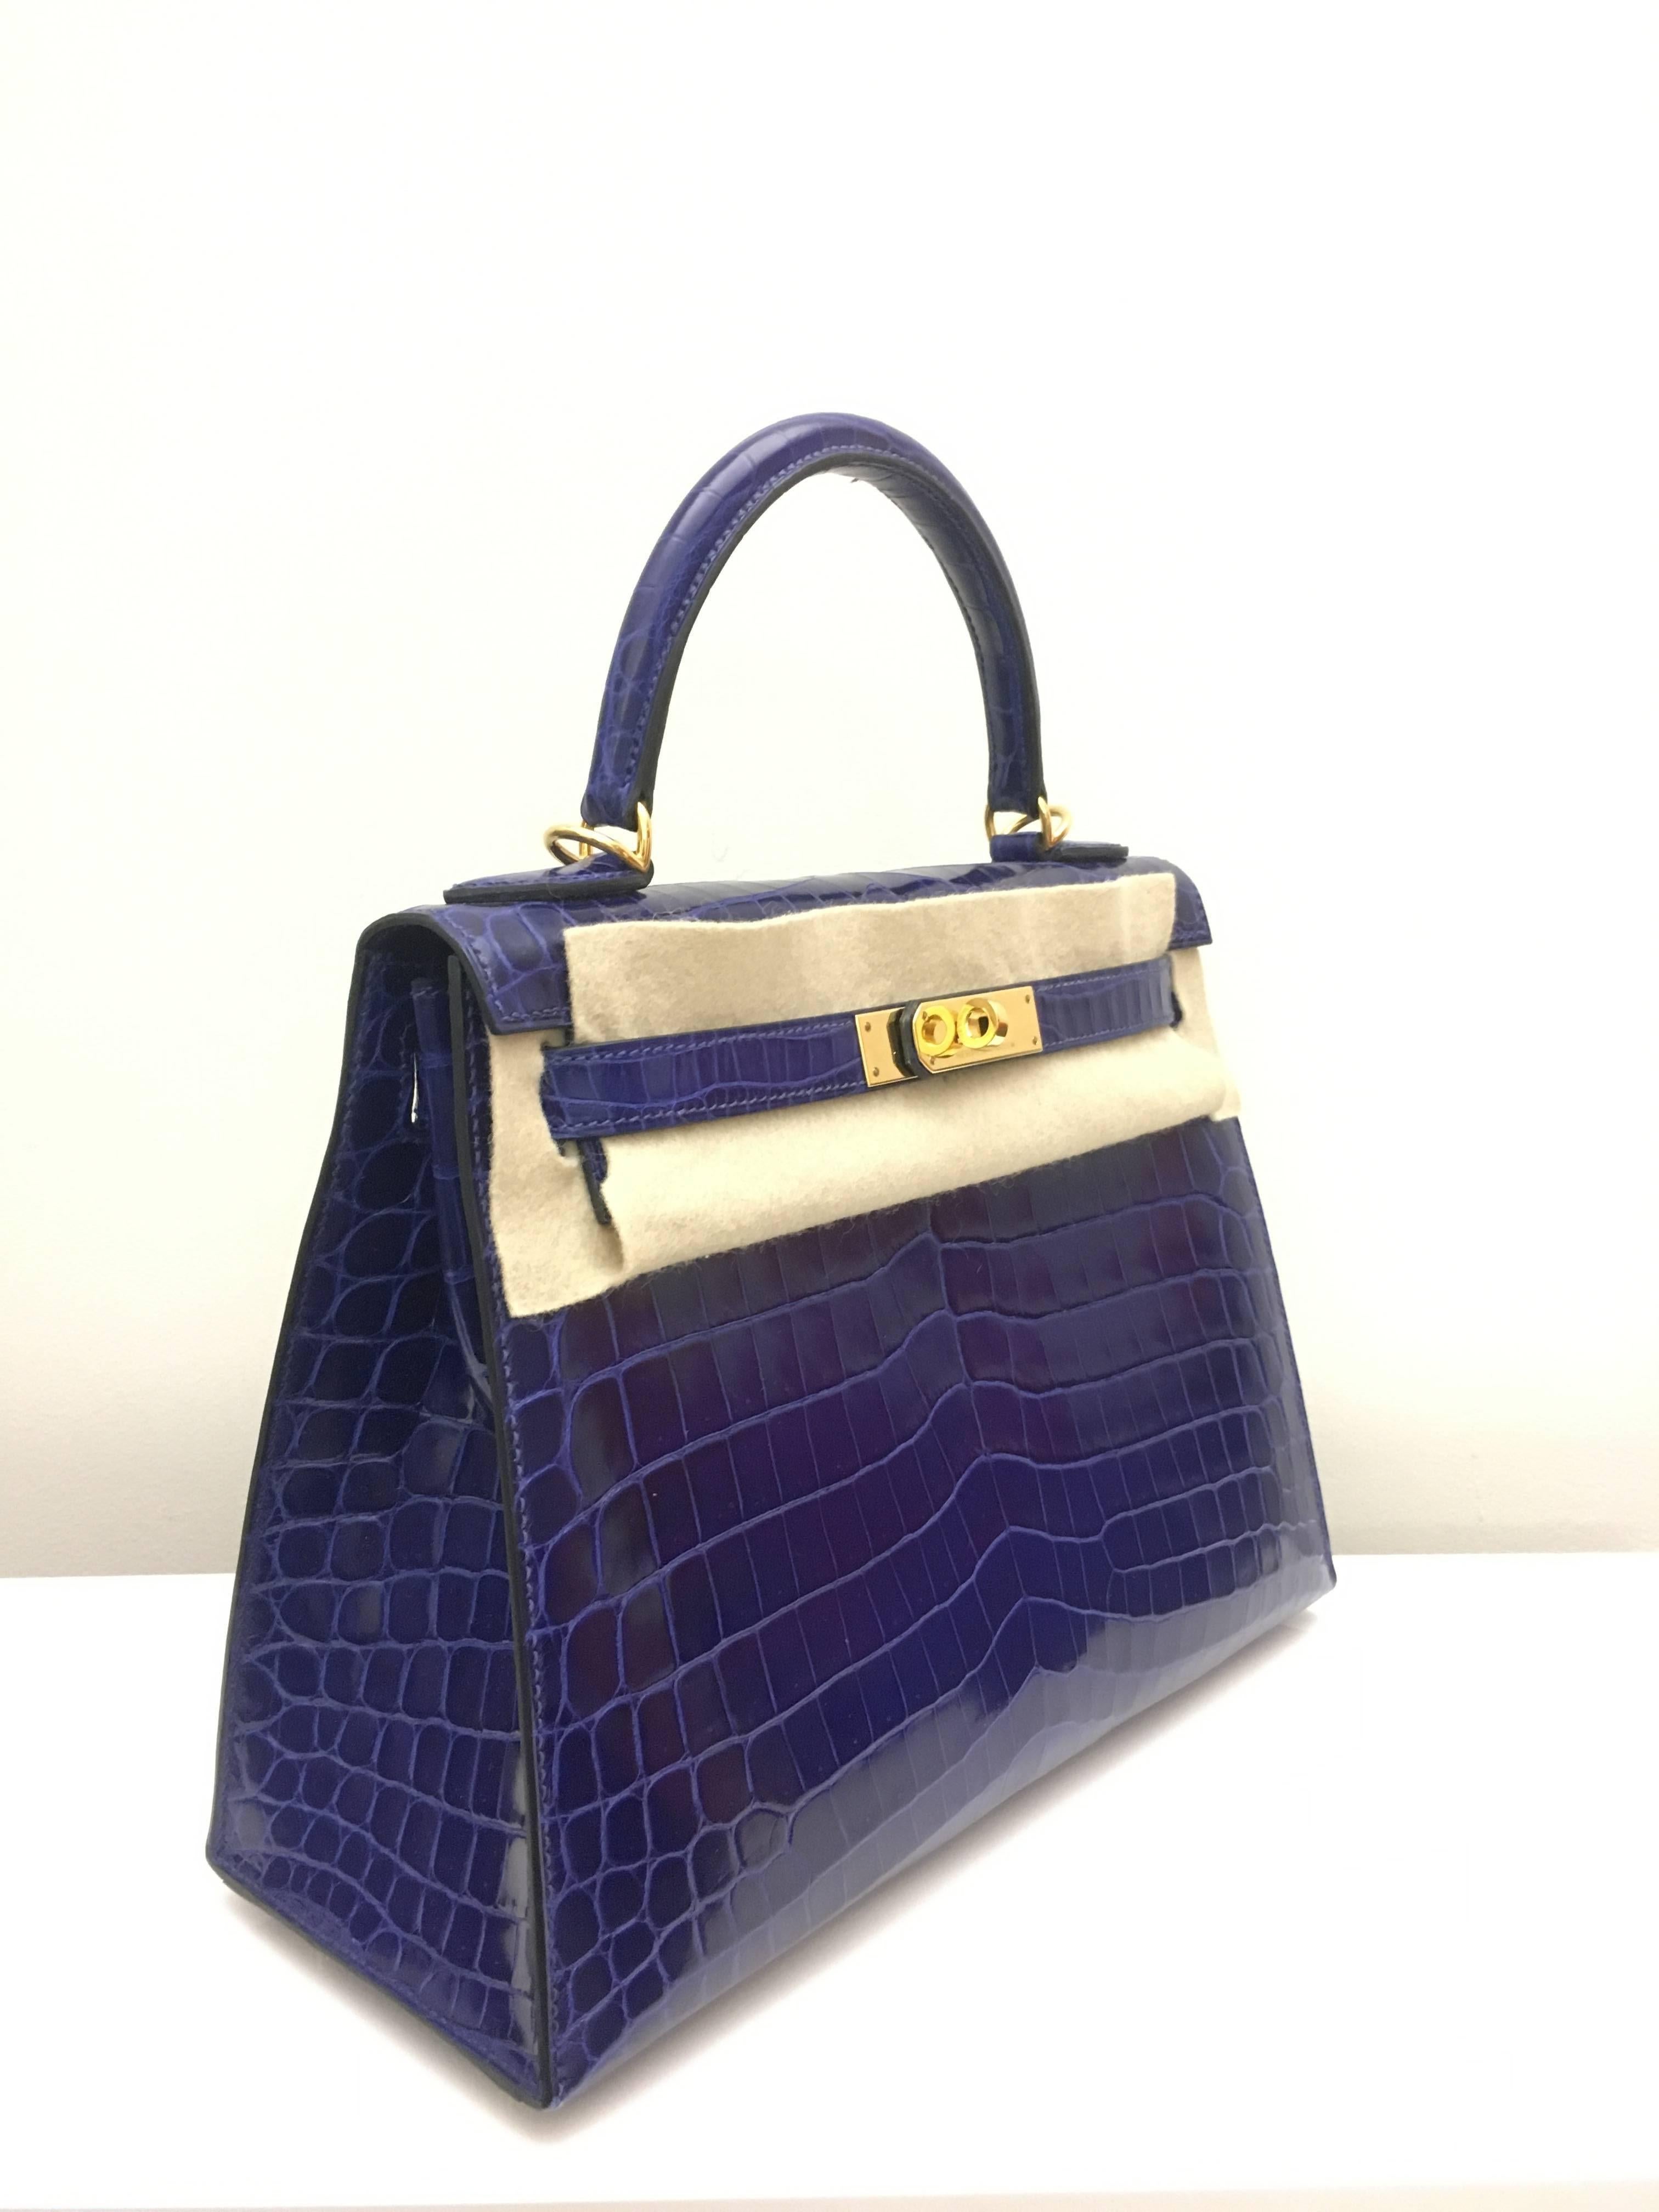 Hermes 
Kelly Size 28
Shiny Croc Leather 
Colour Electric Blue
Gold Hardware 
store fresh, comes with receipt and full set (dust bag, box...) 
Hydeparkfashion specializes in sourcing and delivering authentic luxury handbags, mainly Hermes, to